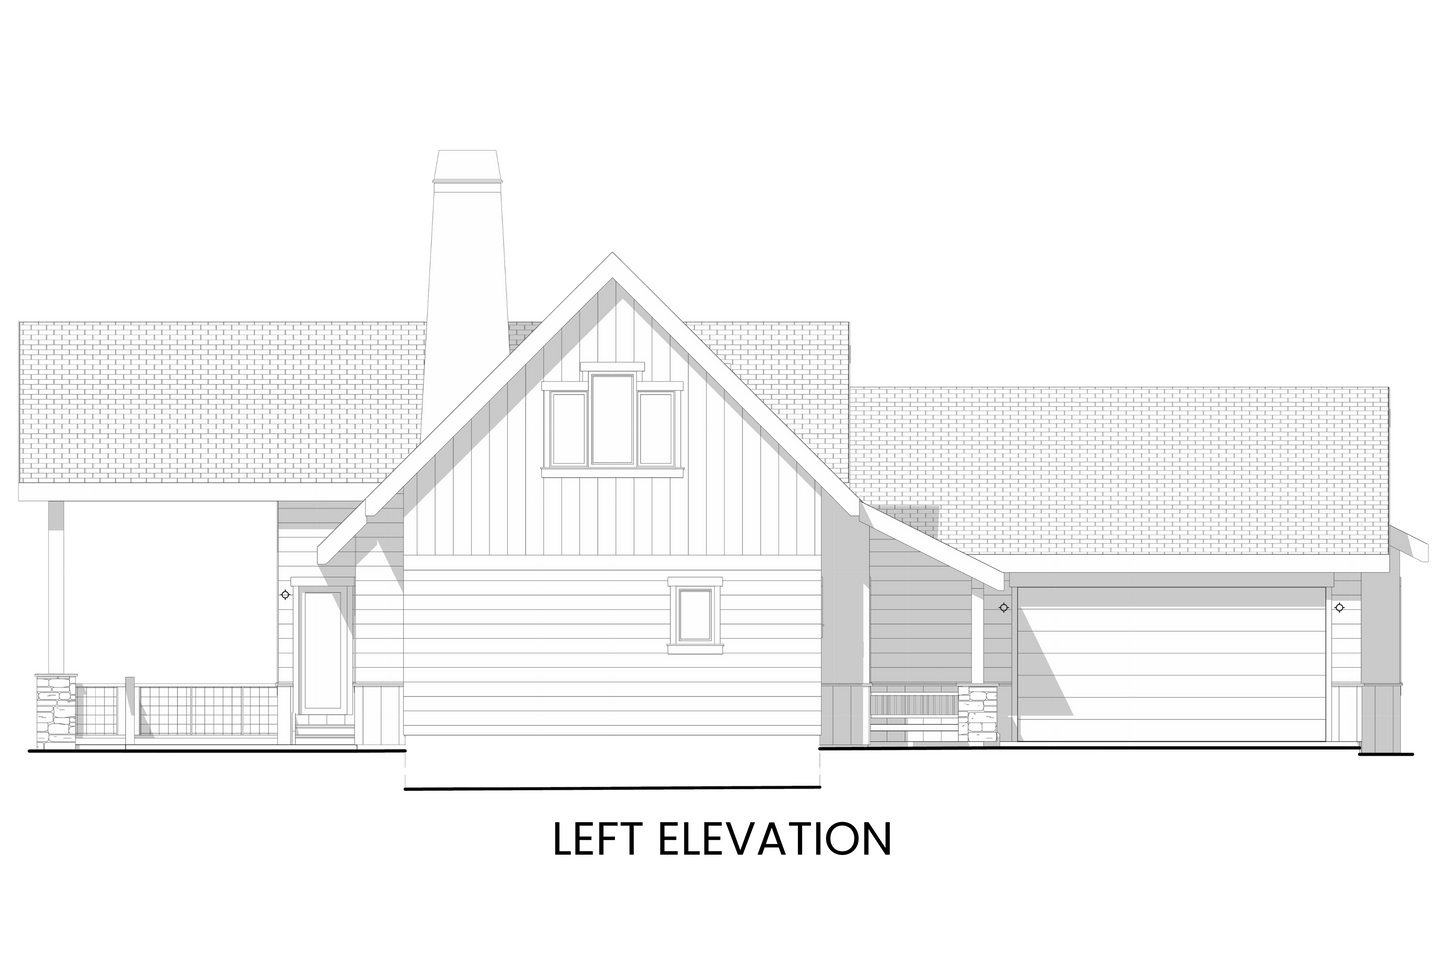 Cabin-Plan-with-Front-Porch-for-Sites-with-a-Rear-View-Left-Elevation-Rocky-Mountain-Plan-Company-Lake-Agnes